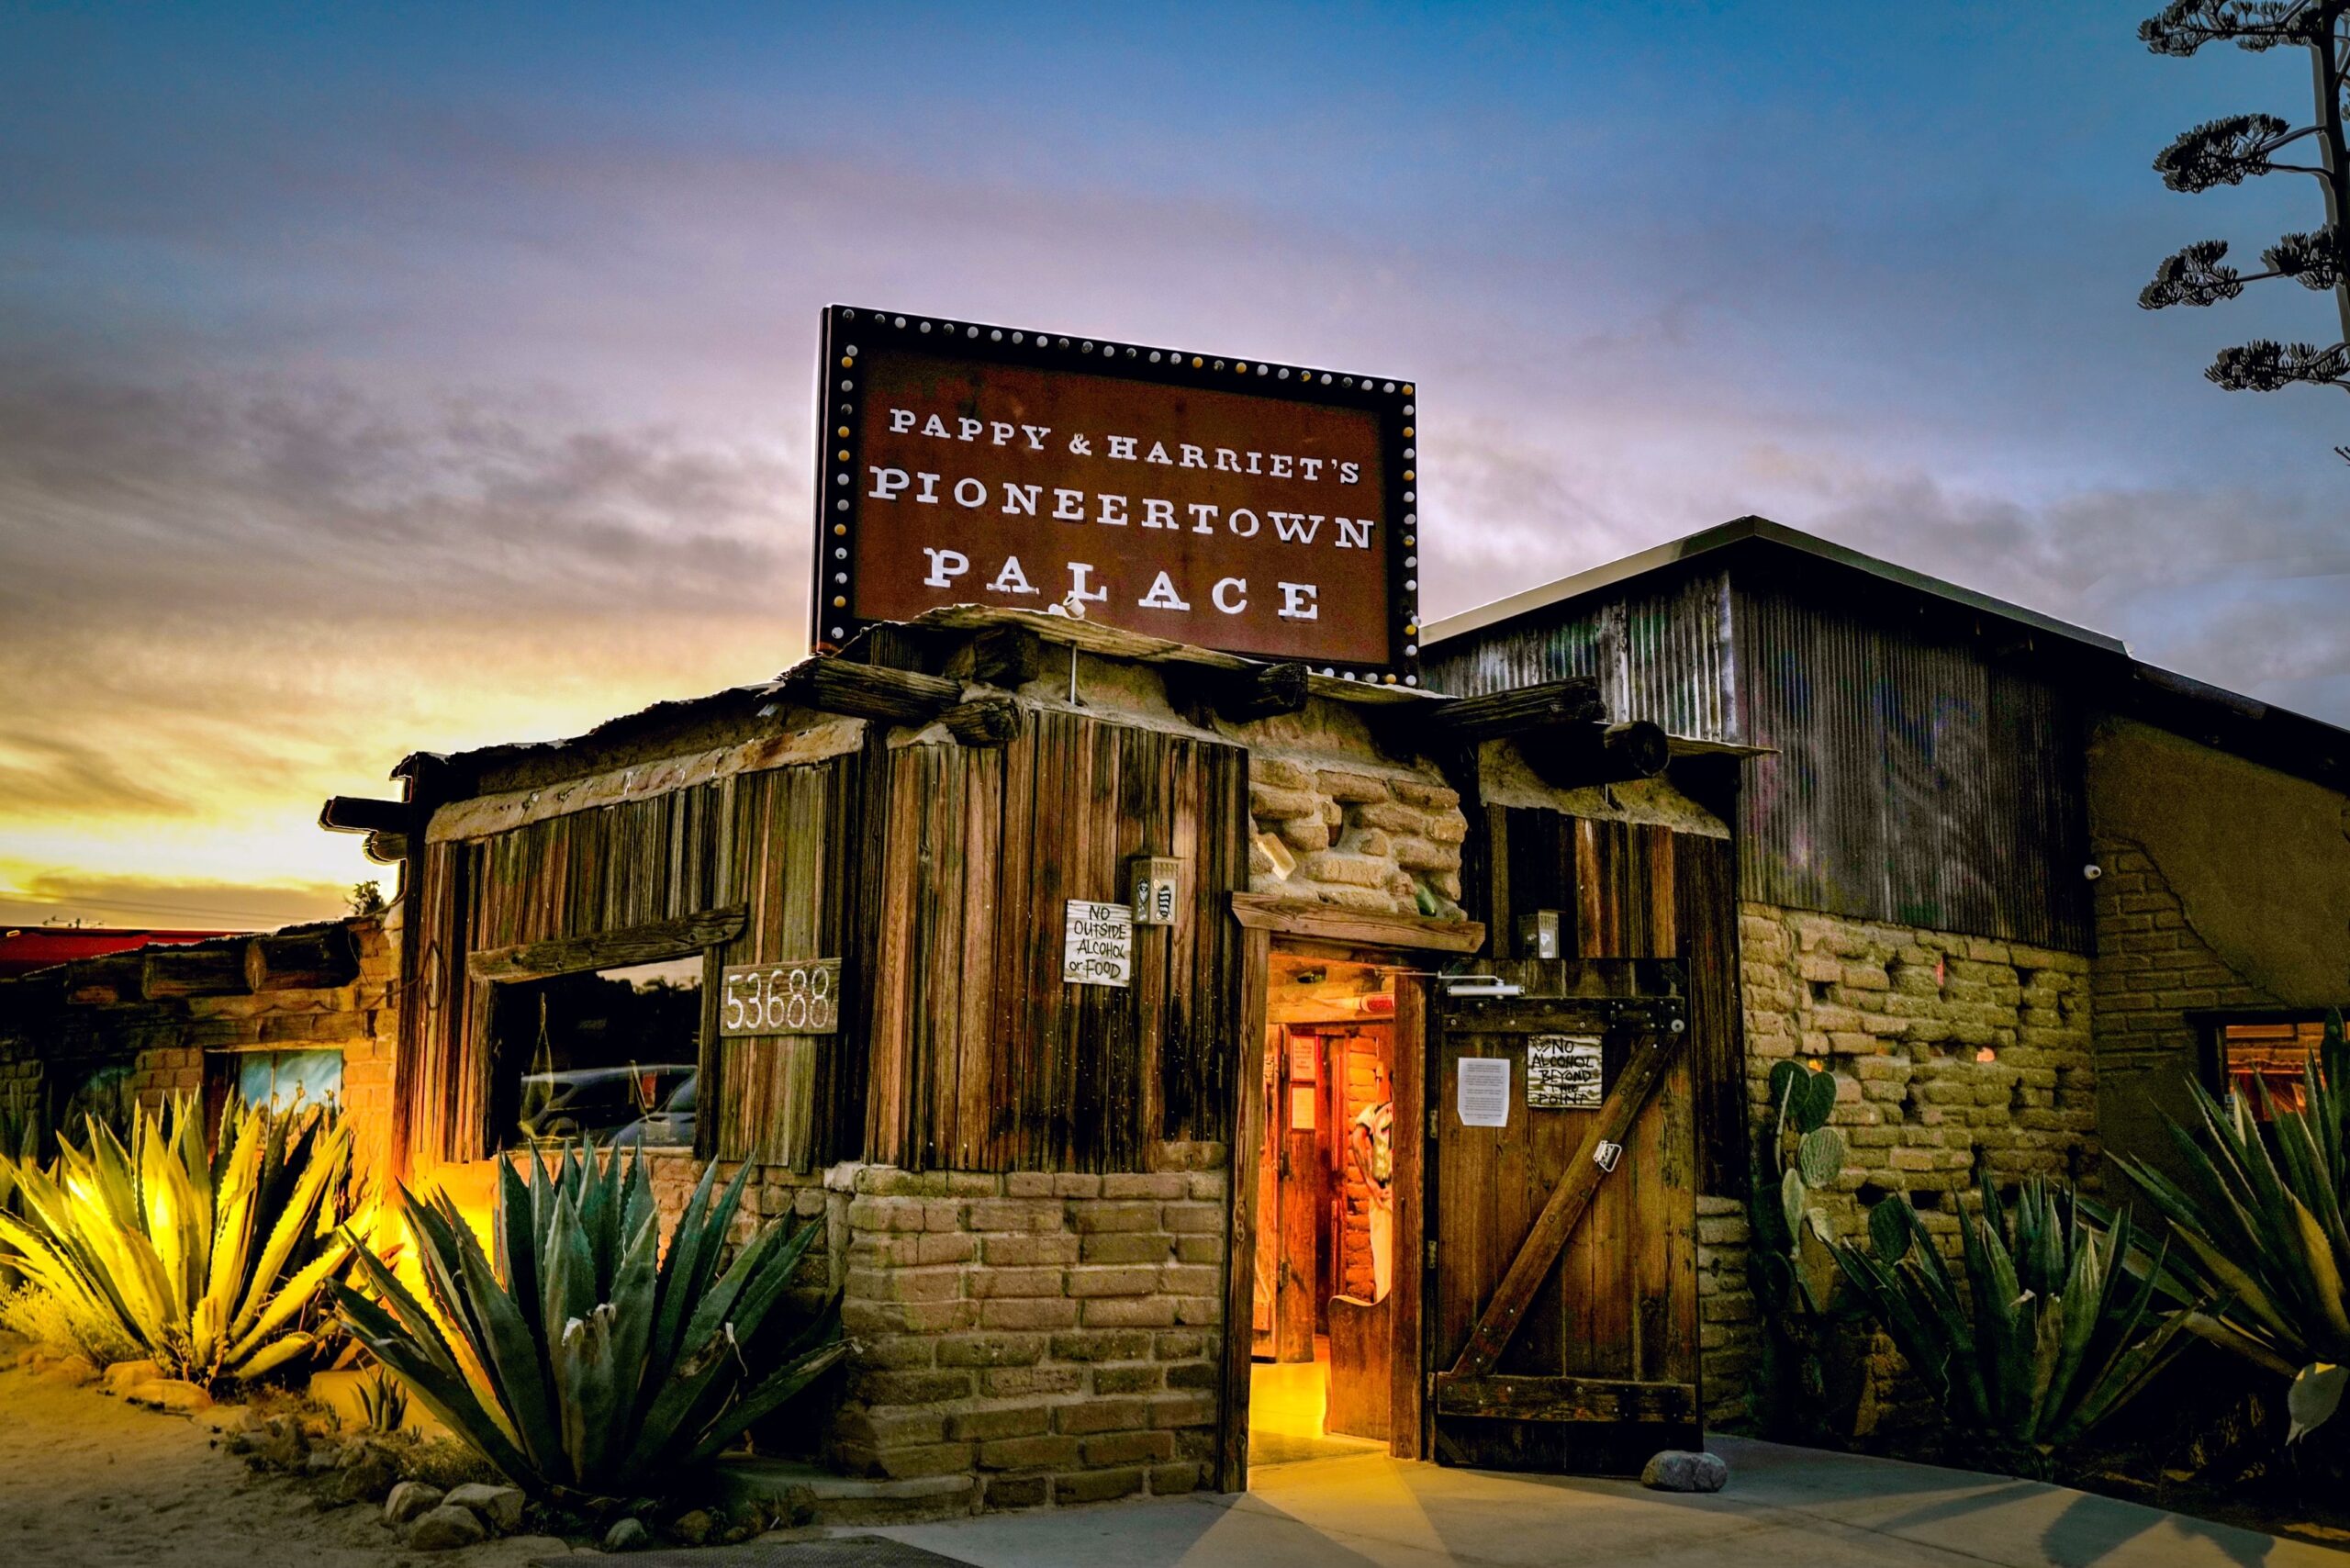 Exterior sunset view of the entrance and sign for Pappy & Harriet's Pioneertown Palace in Pioneertown, California.